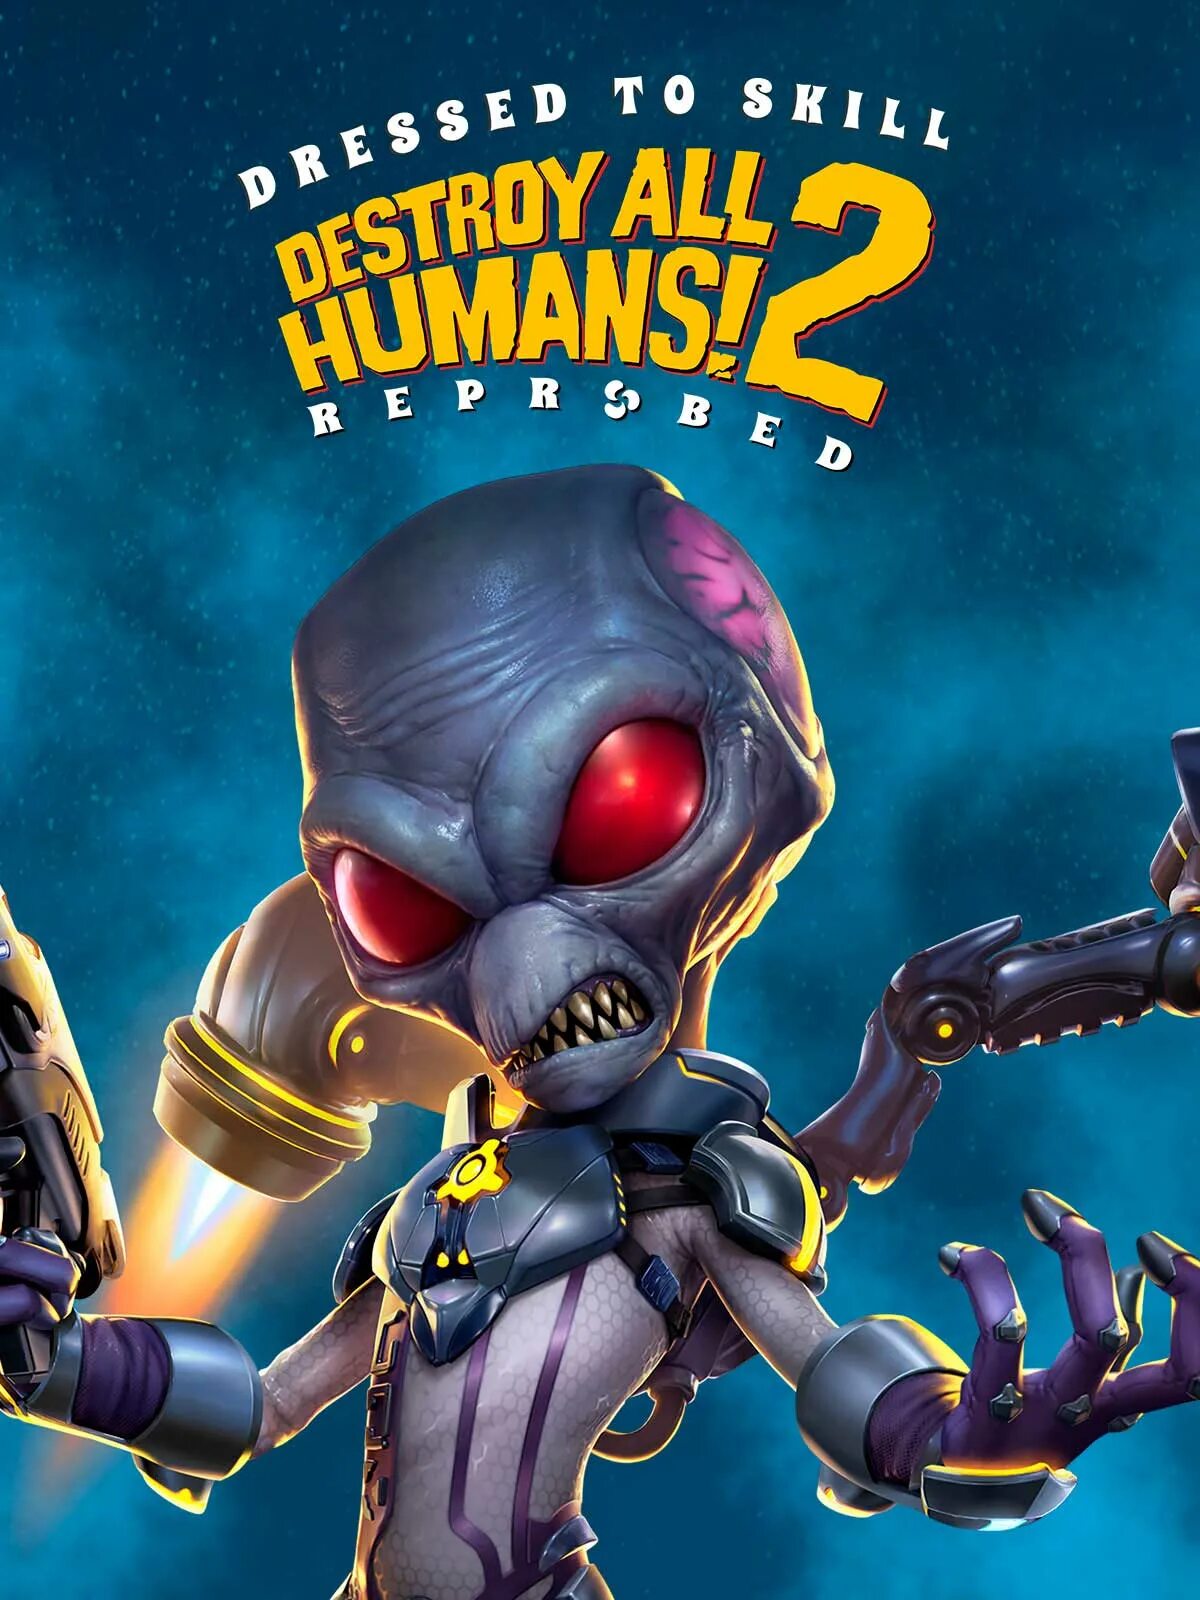 All humans 2 reprobed. Destroy all Humans 2 reprobed. Destroy all Humans!. Destroy all Humans! 2 - Reprobed: Dressed to skill Edition. Destroy all Humans reprobed.